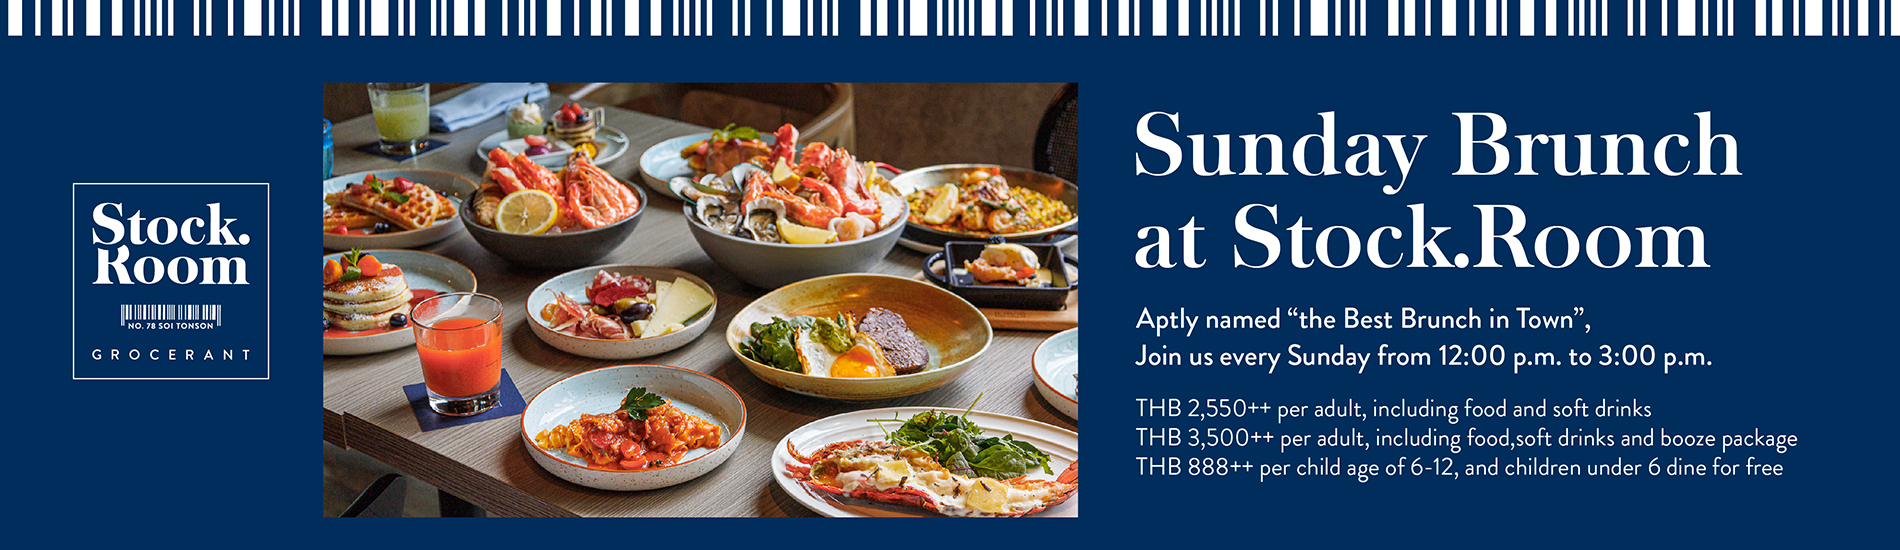 One of our Corporate Members, Kimpton Maa-Lai Bangkok has launched a special Sunday Brunch at Stock.Room.